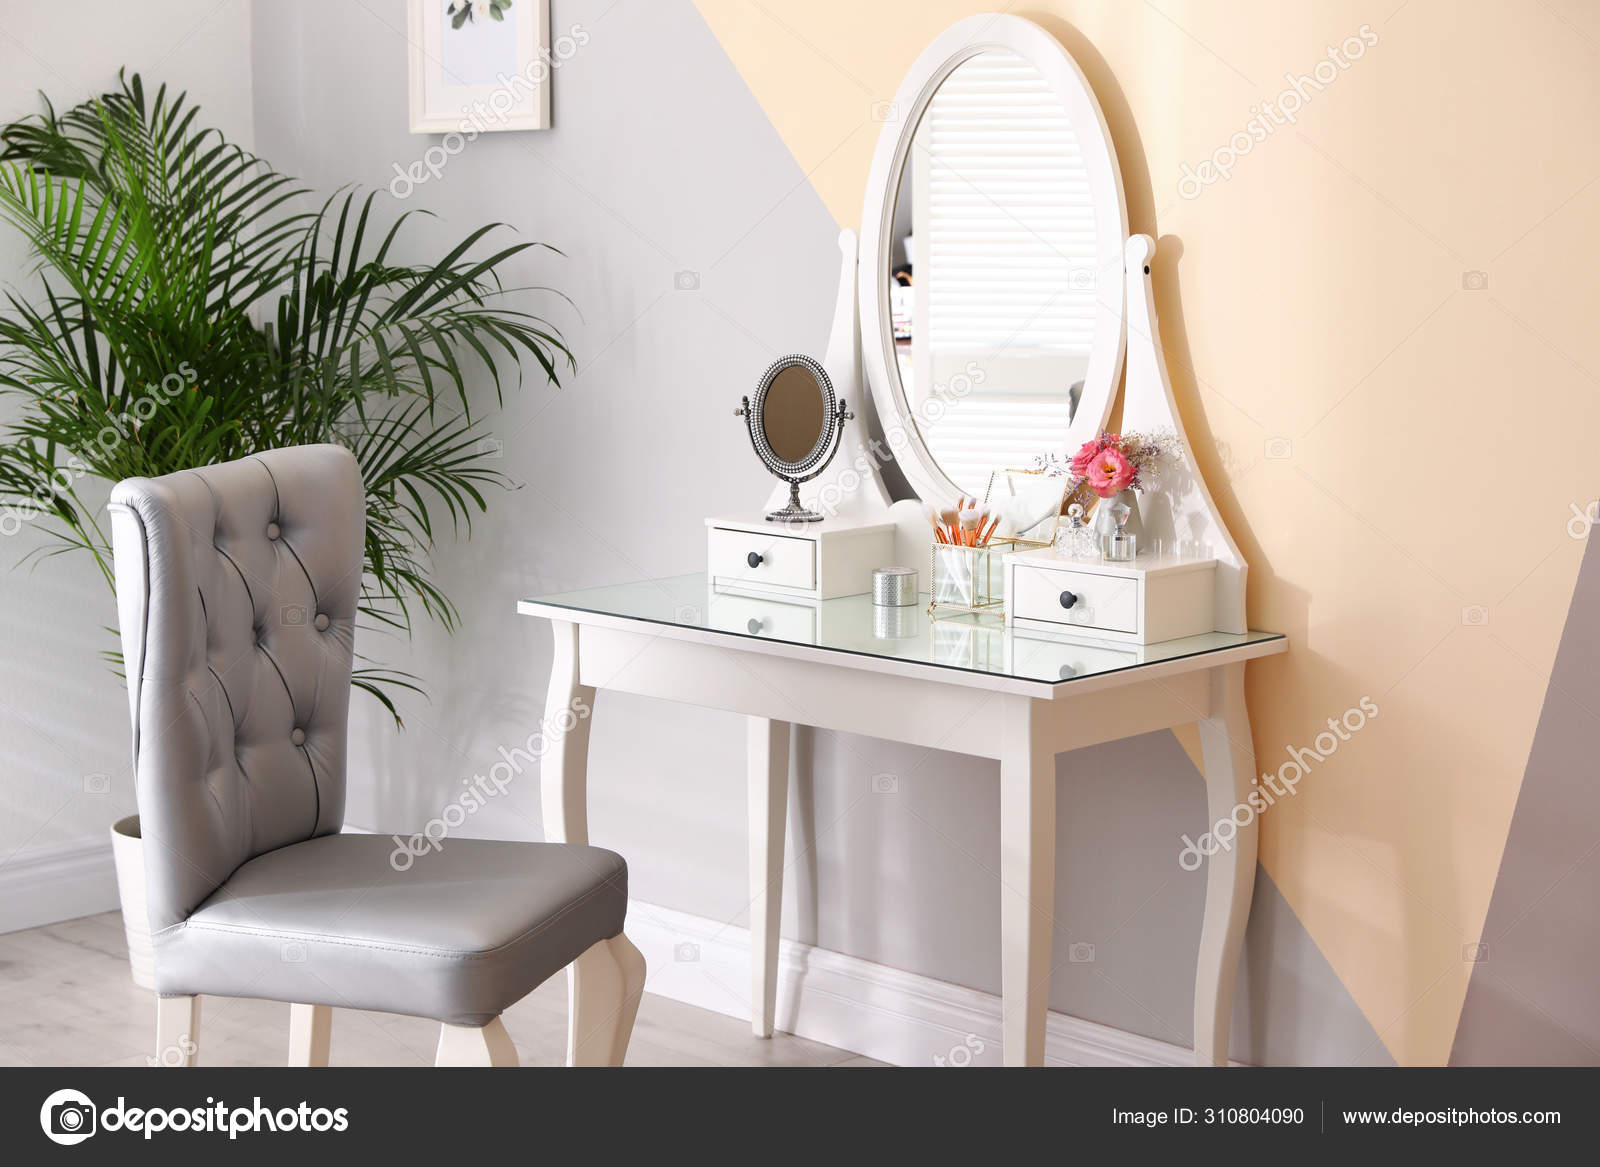 Stylish Room Interior With Modern Dressing Table And Elegant Chair